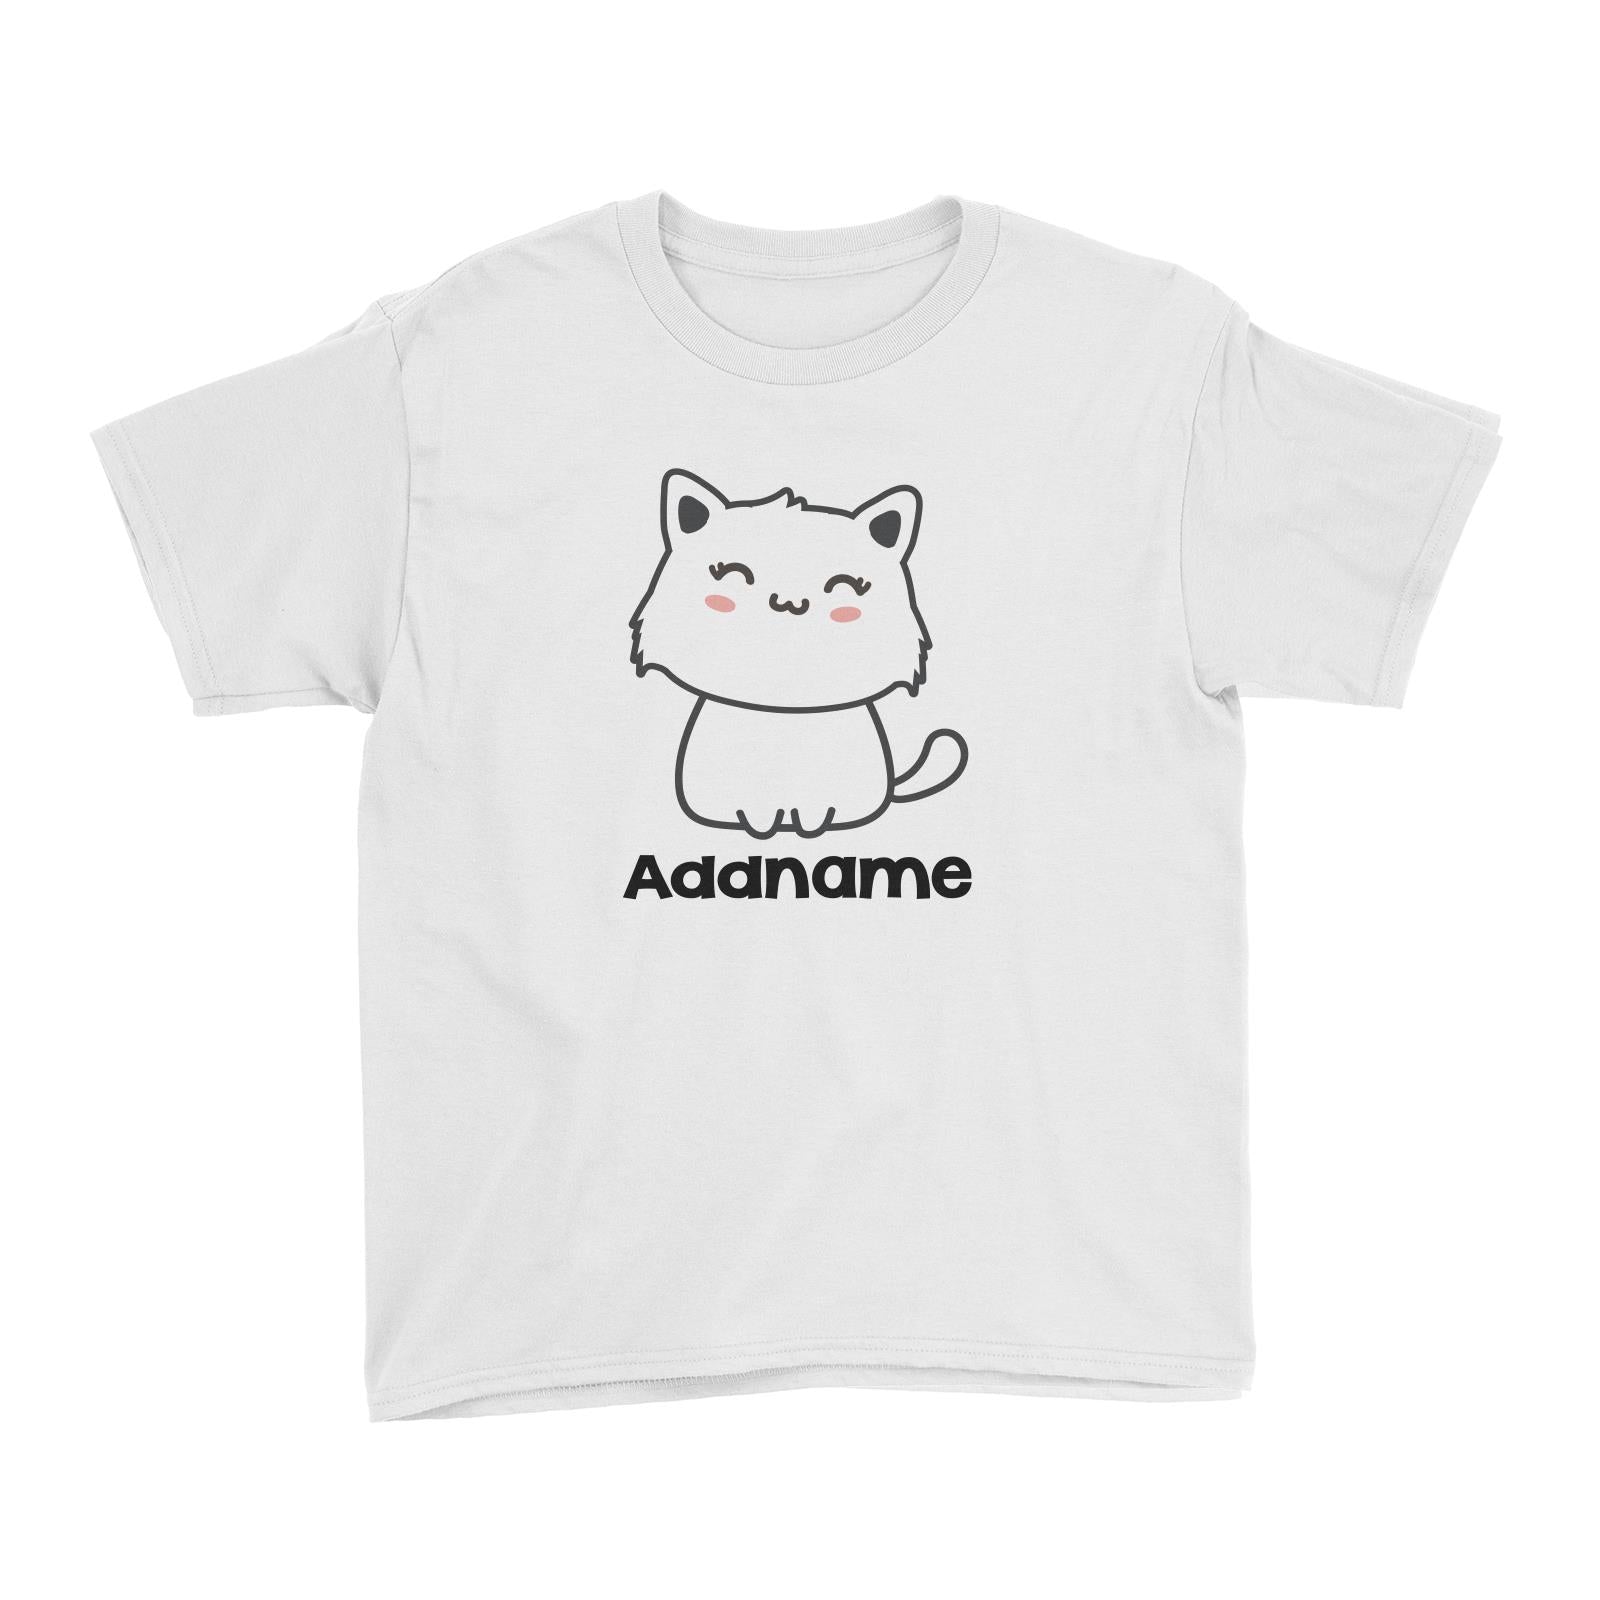 Drawn Adorable Cats White Addname Kid's T-Shirt